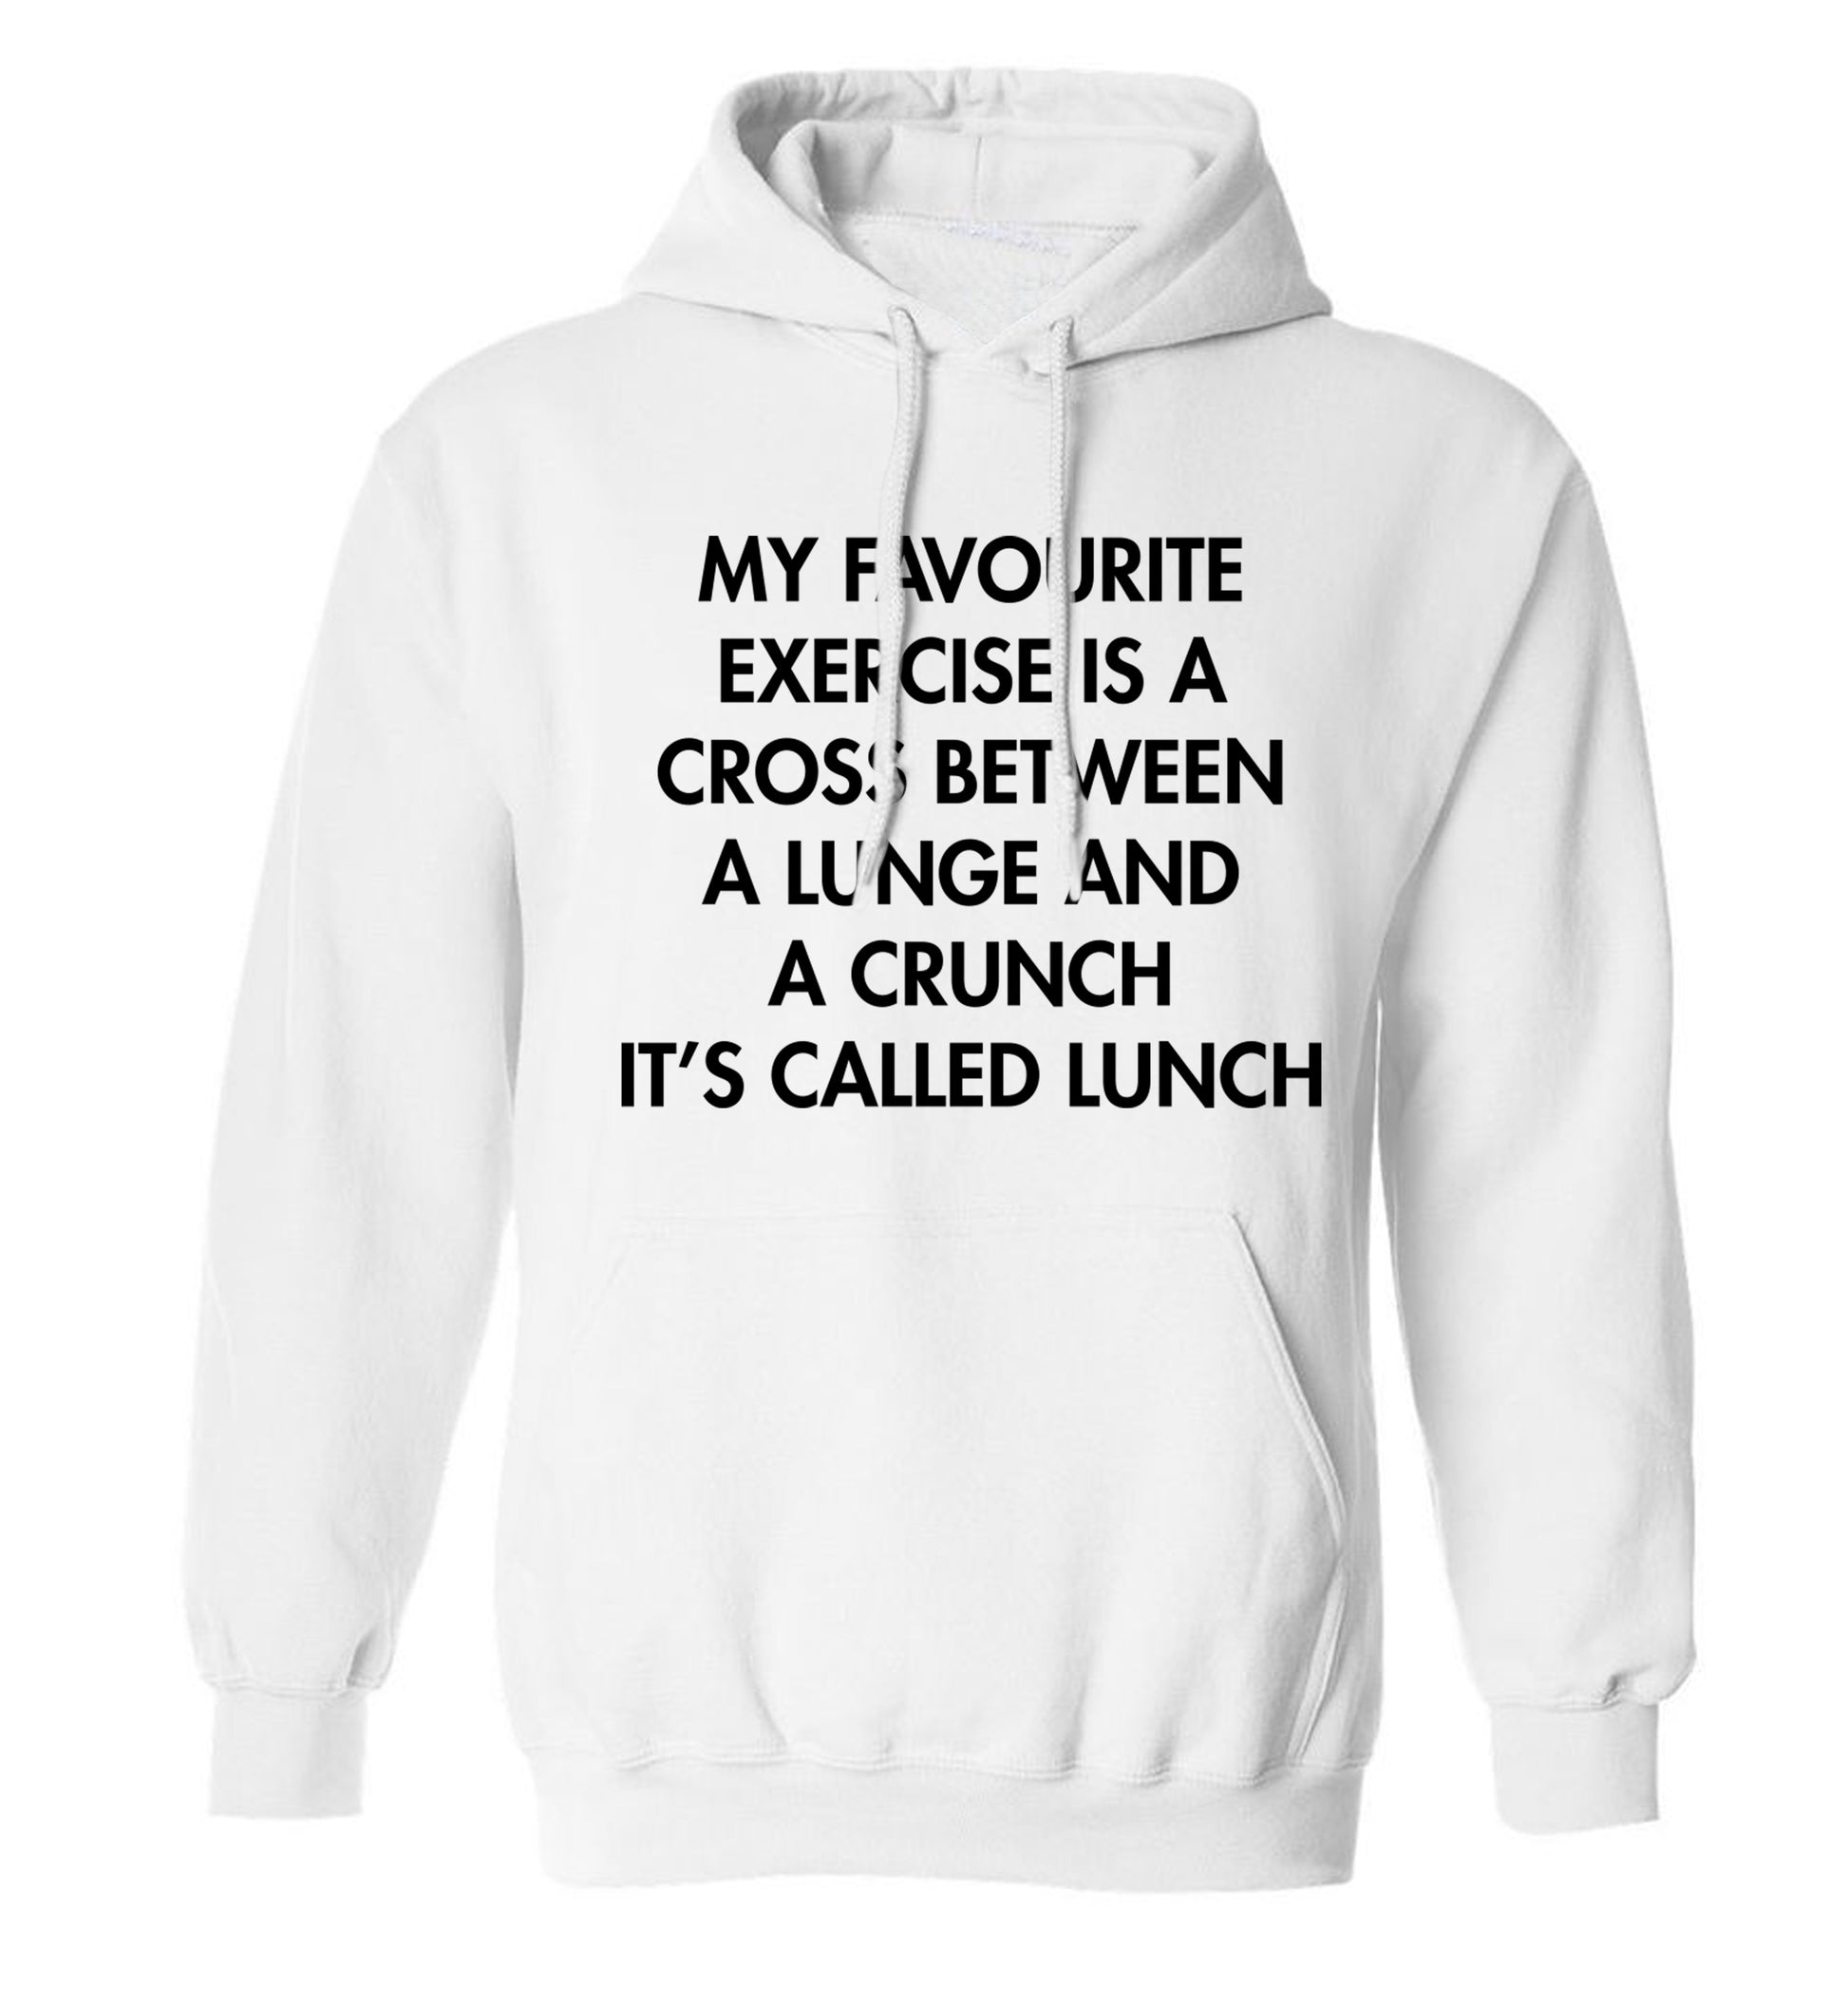 My favourite exercise is a cross between a lung and a crunch it's called lunch adults unisex white hoodie 2XL